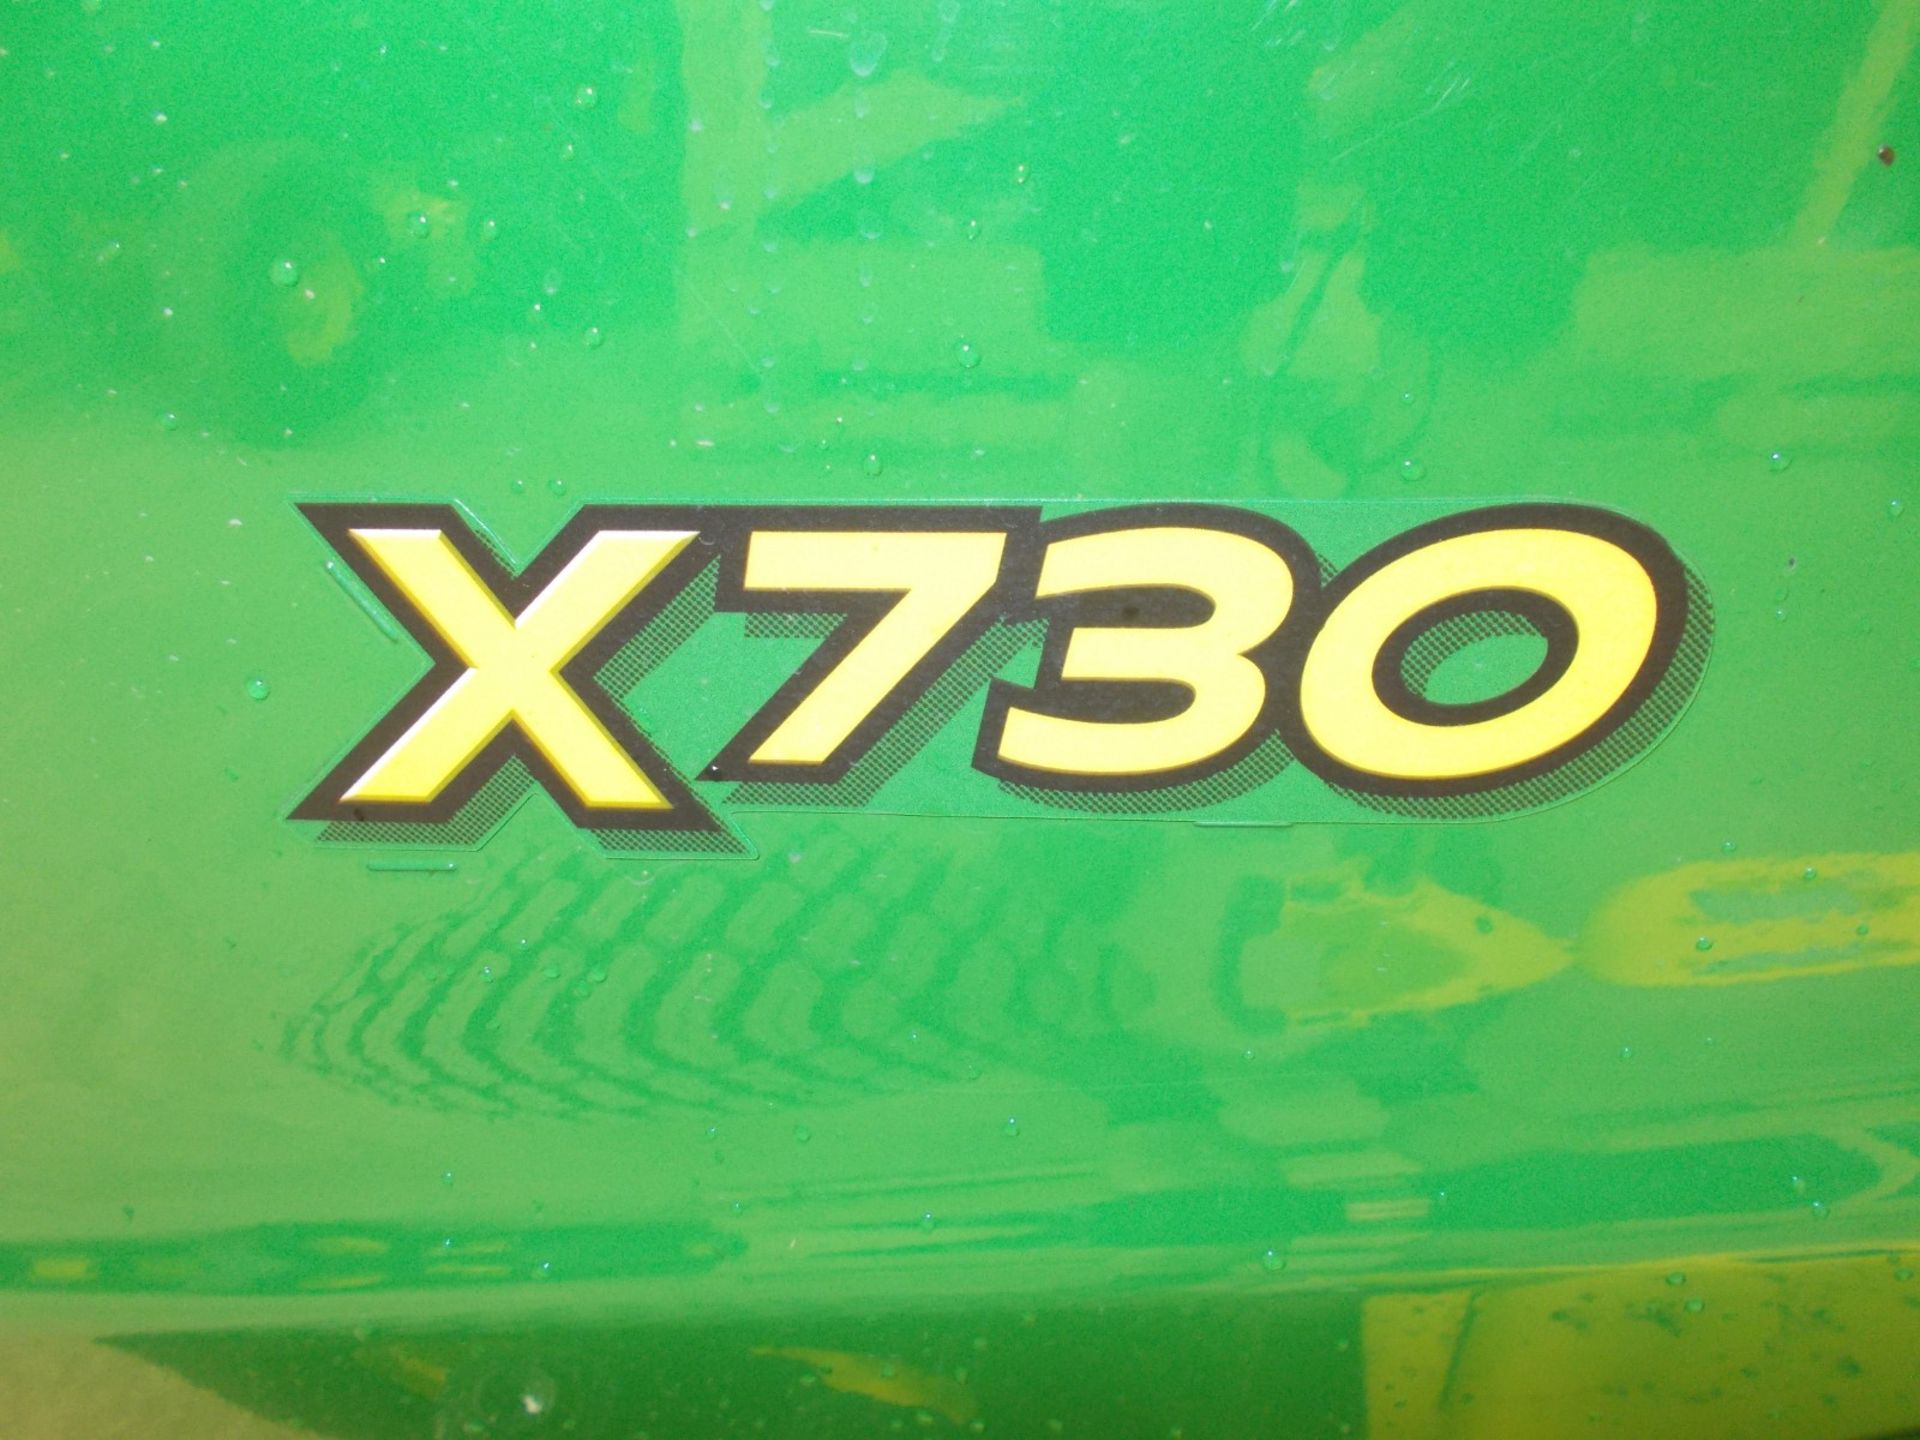 2018 JOHN DEERE X730 RIDE ON LAWN TRACTOR, 194 HOURS, 60” CUTTING DECK *PLUS VAT* - Image 11 of 20